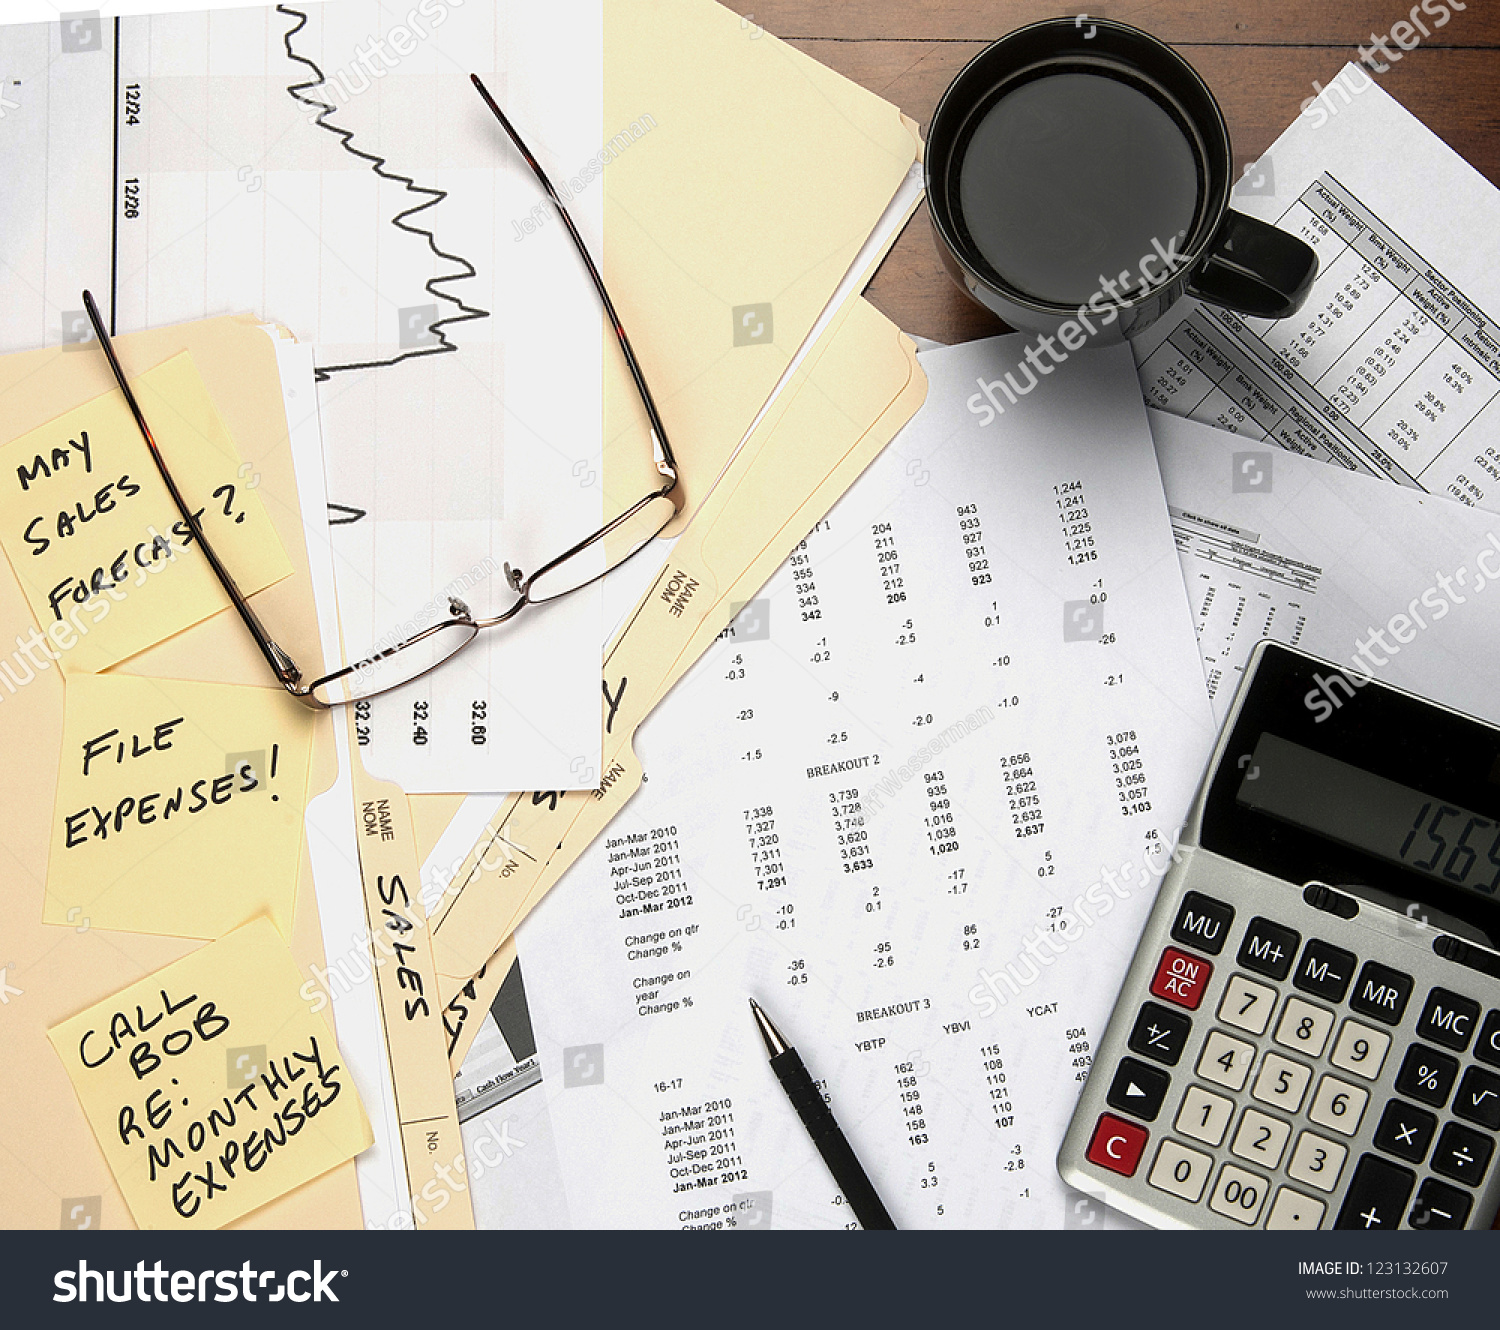 Desk Financial Papers Calculator Coffee Cup Stock Photo (Royalty ...